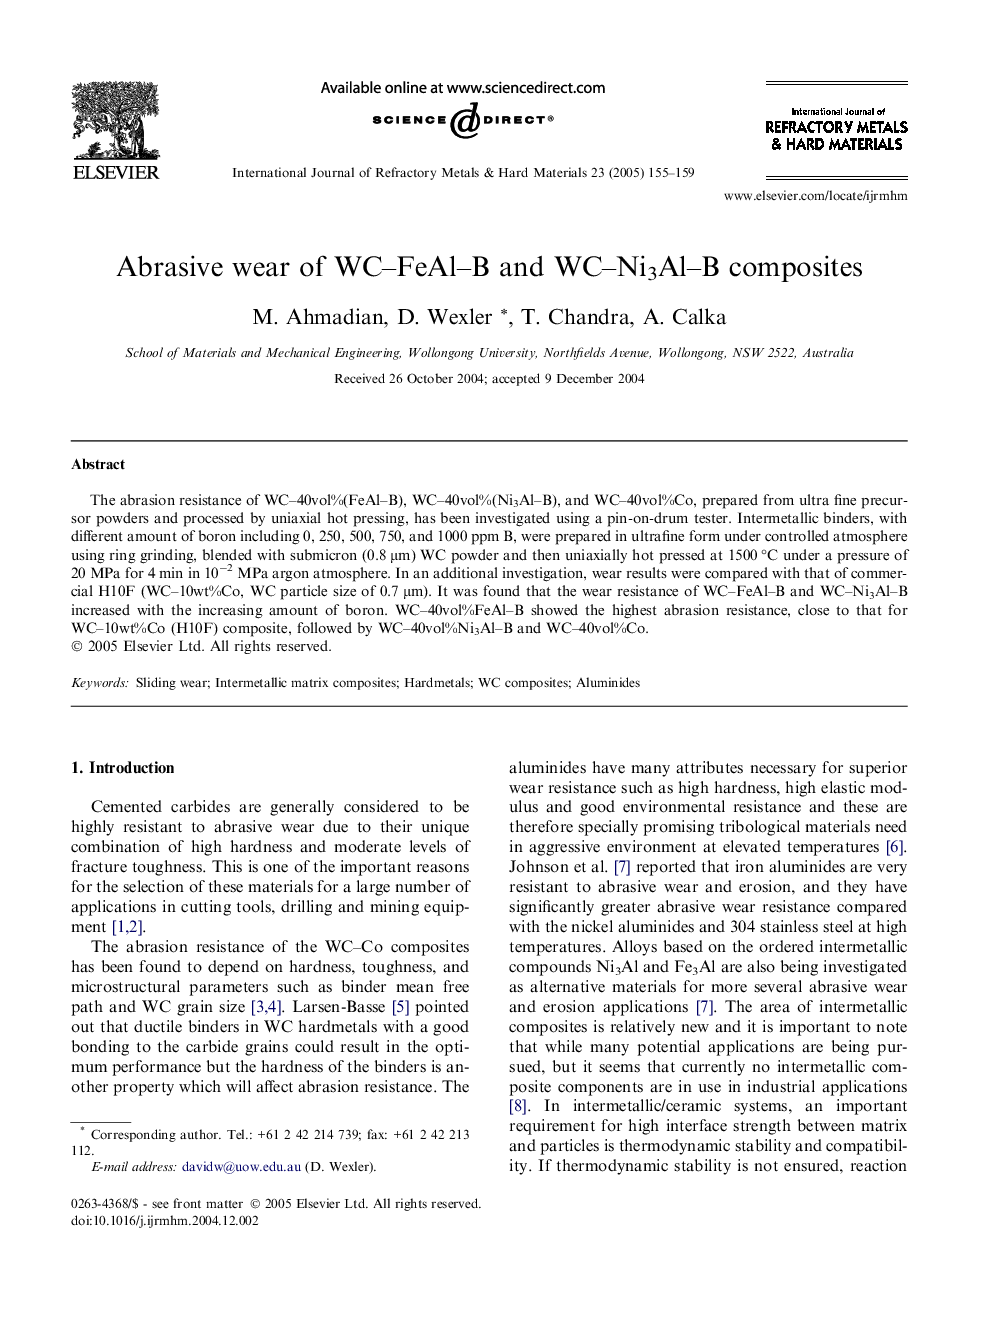 Abrasive wear of WC-FeAl-B and WC-Ni3Al-B composites